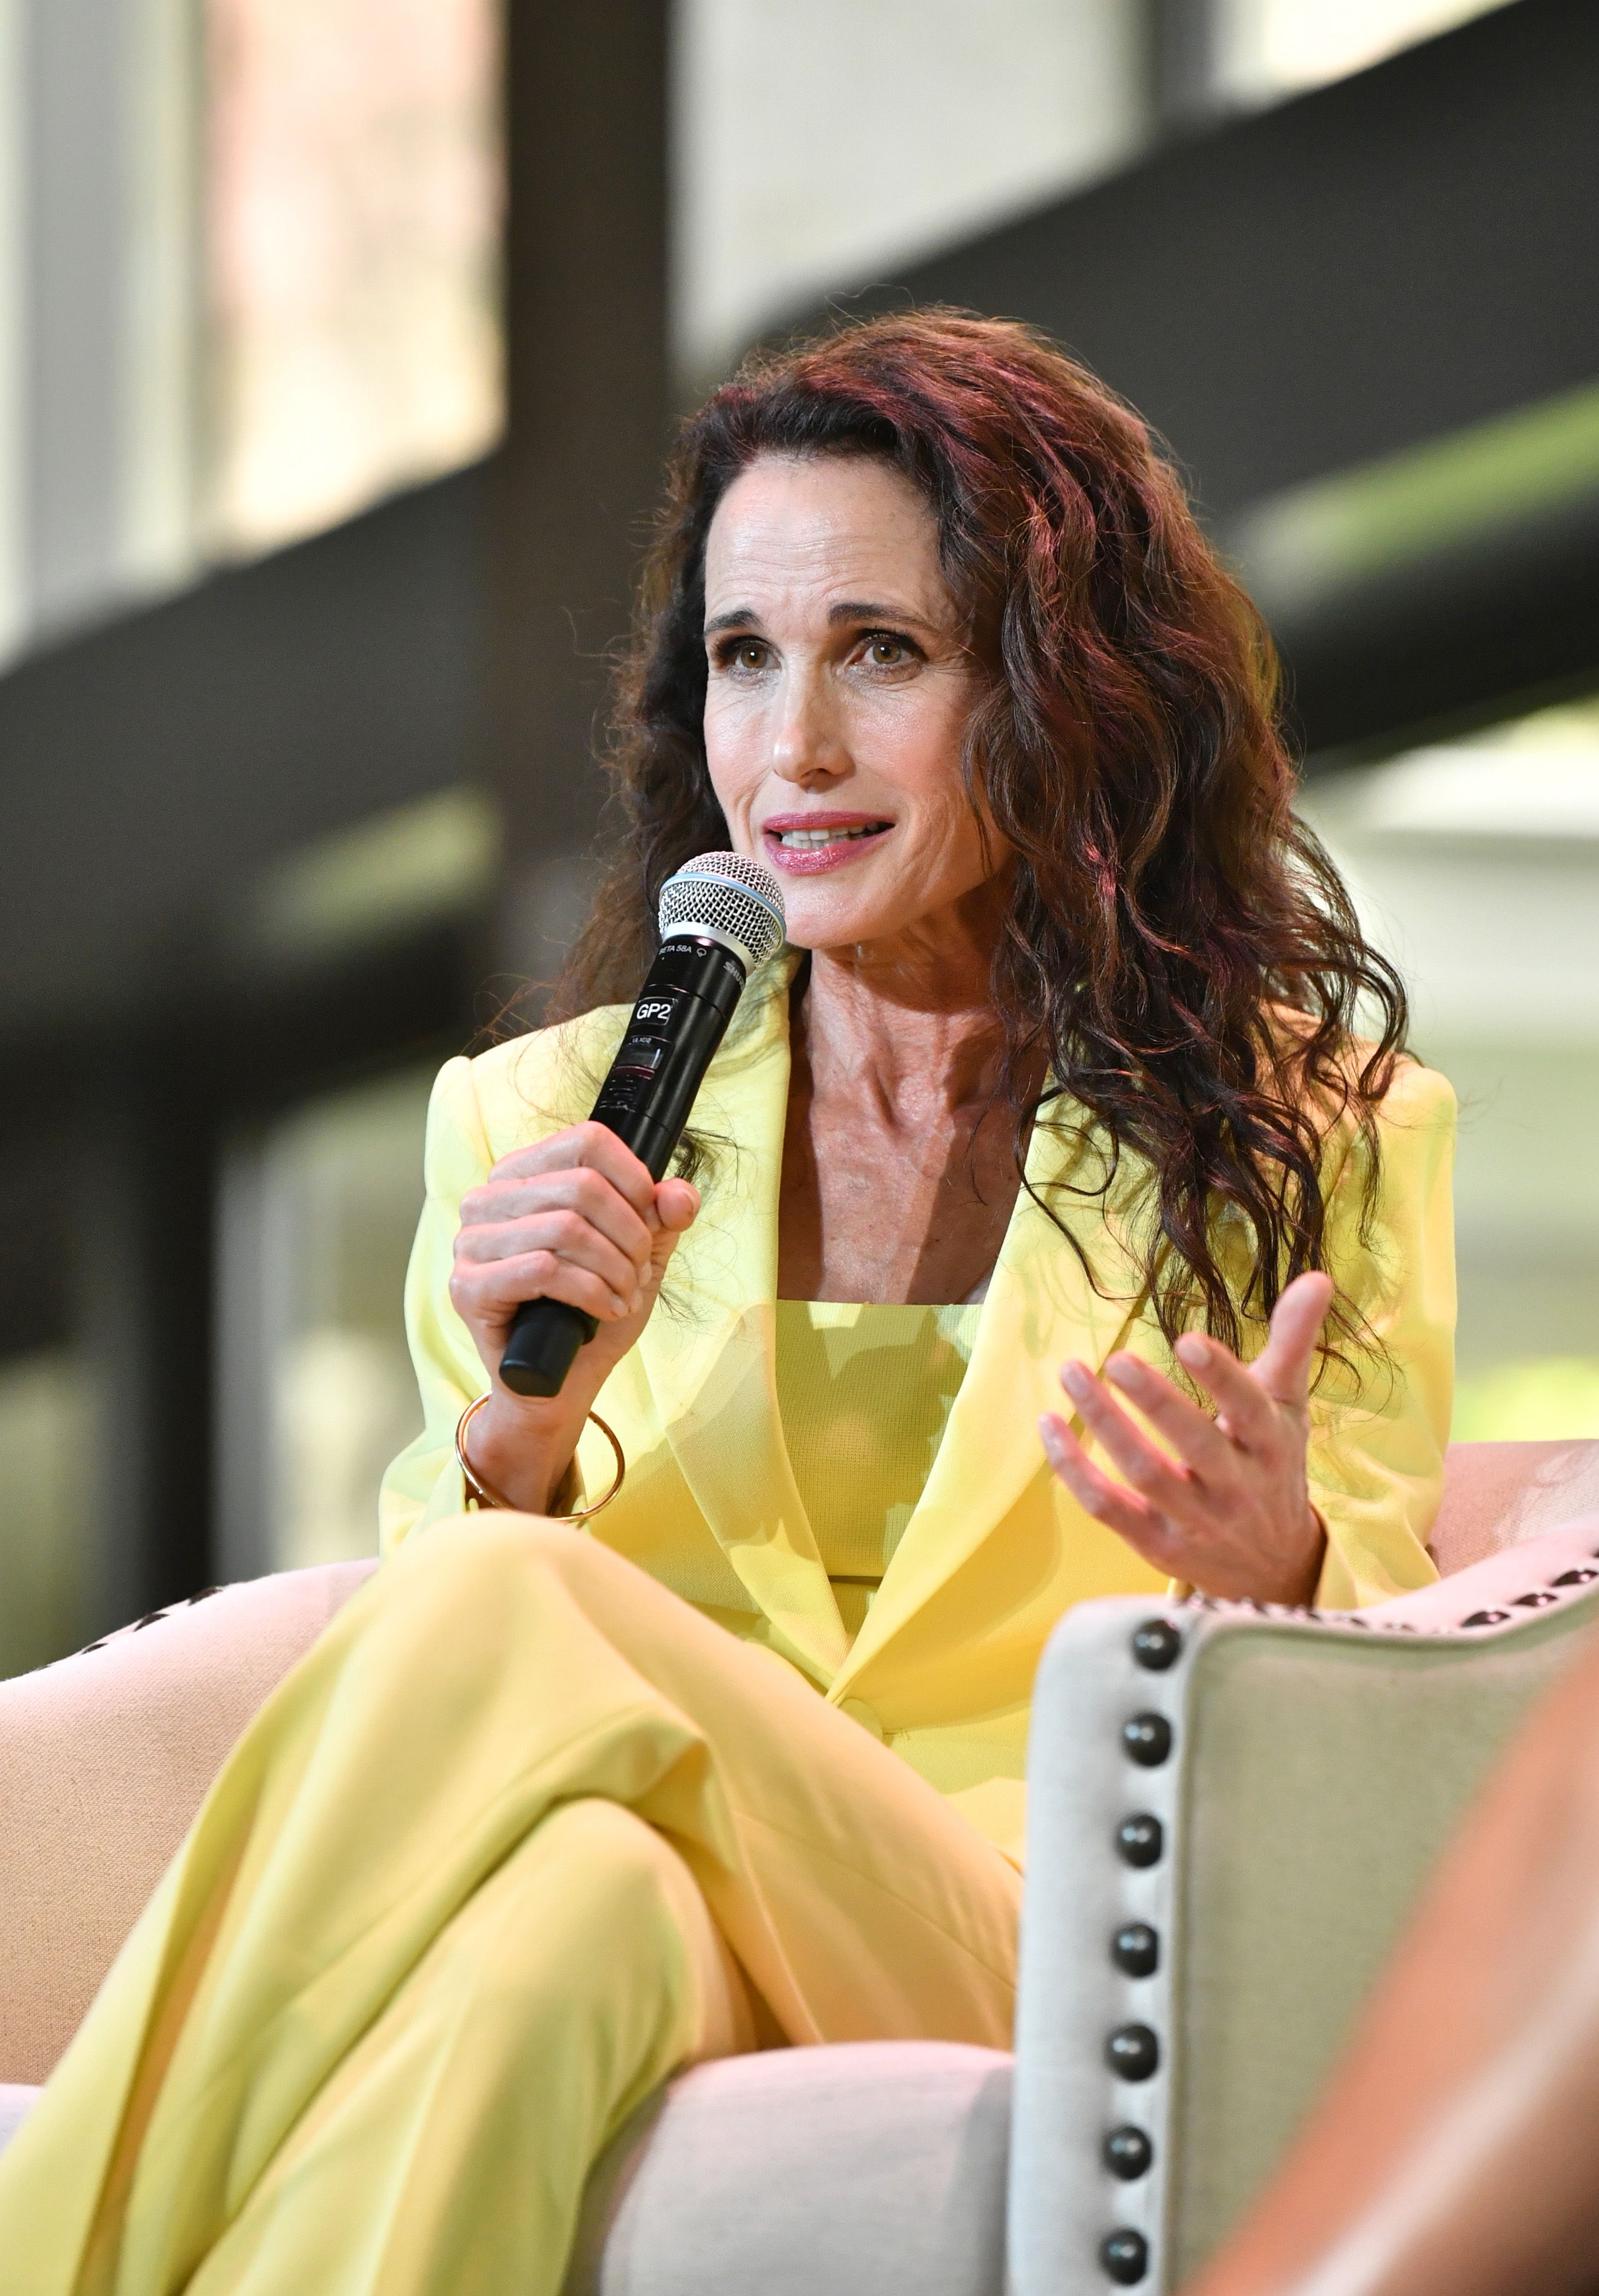 Andie MacDowell talks at the National Women's History Museum's 8th Annual Women Making History Awardsat Skirball Cultural Center on March 08, 2020 in Los Angeles, California. | Source: Getty Images